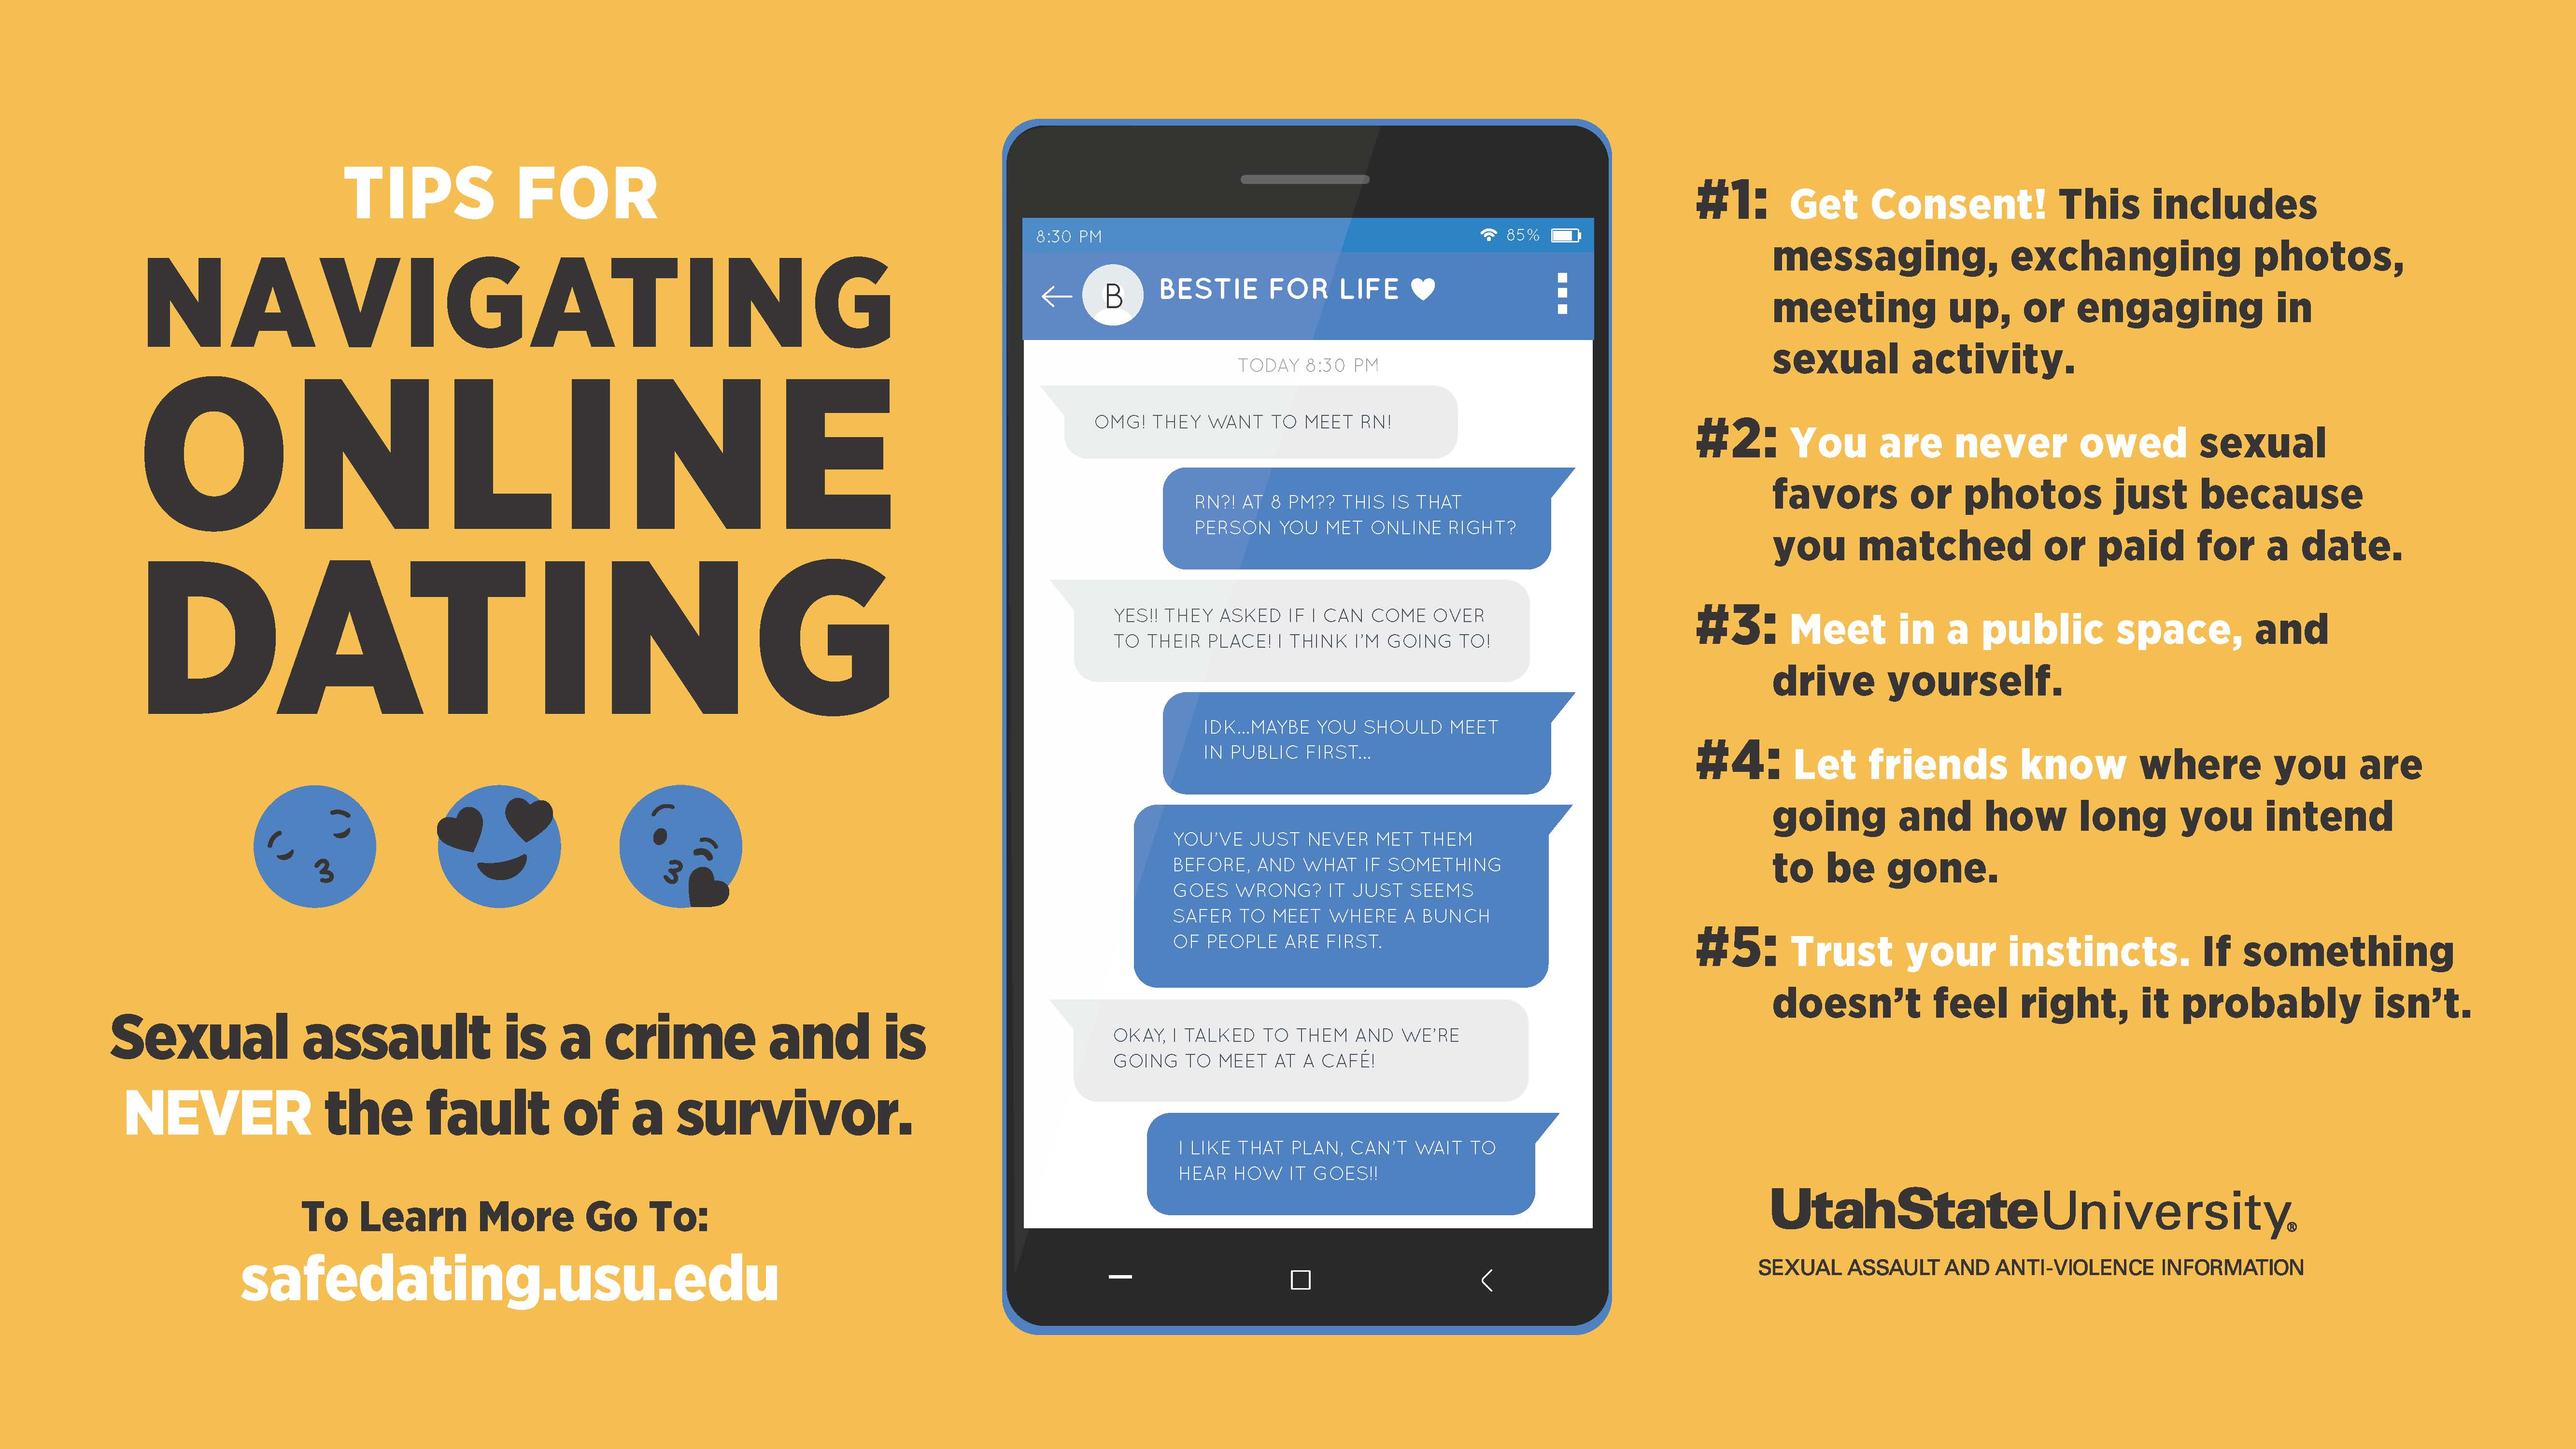 Tips for navigating online dating: sexual assault is a crime and is never the fault of a survivor. To learn more go to: safedating.usu.edu. #1: Get consent!  This includes messaging, exchanging photos, meeting up, or engaging in sexual activity. #2: You are never owed sexual favors or photos just because you matched or paid for a date. #3: Meet in a public space, and drive yourself. #4: Let friends know where you are going and how long you intend to be gone. #5: Trust your instincts. If something doesn't feel right, it probably isn't. Utah State University sexual assault and anti-violence information.